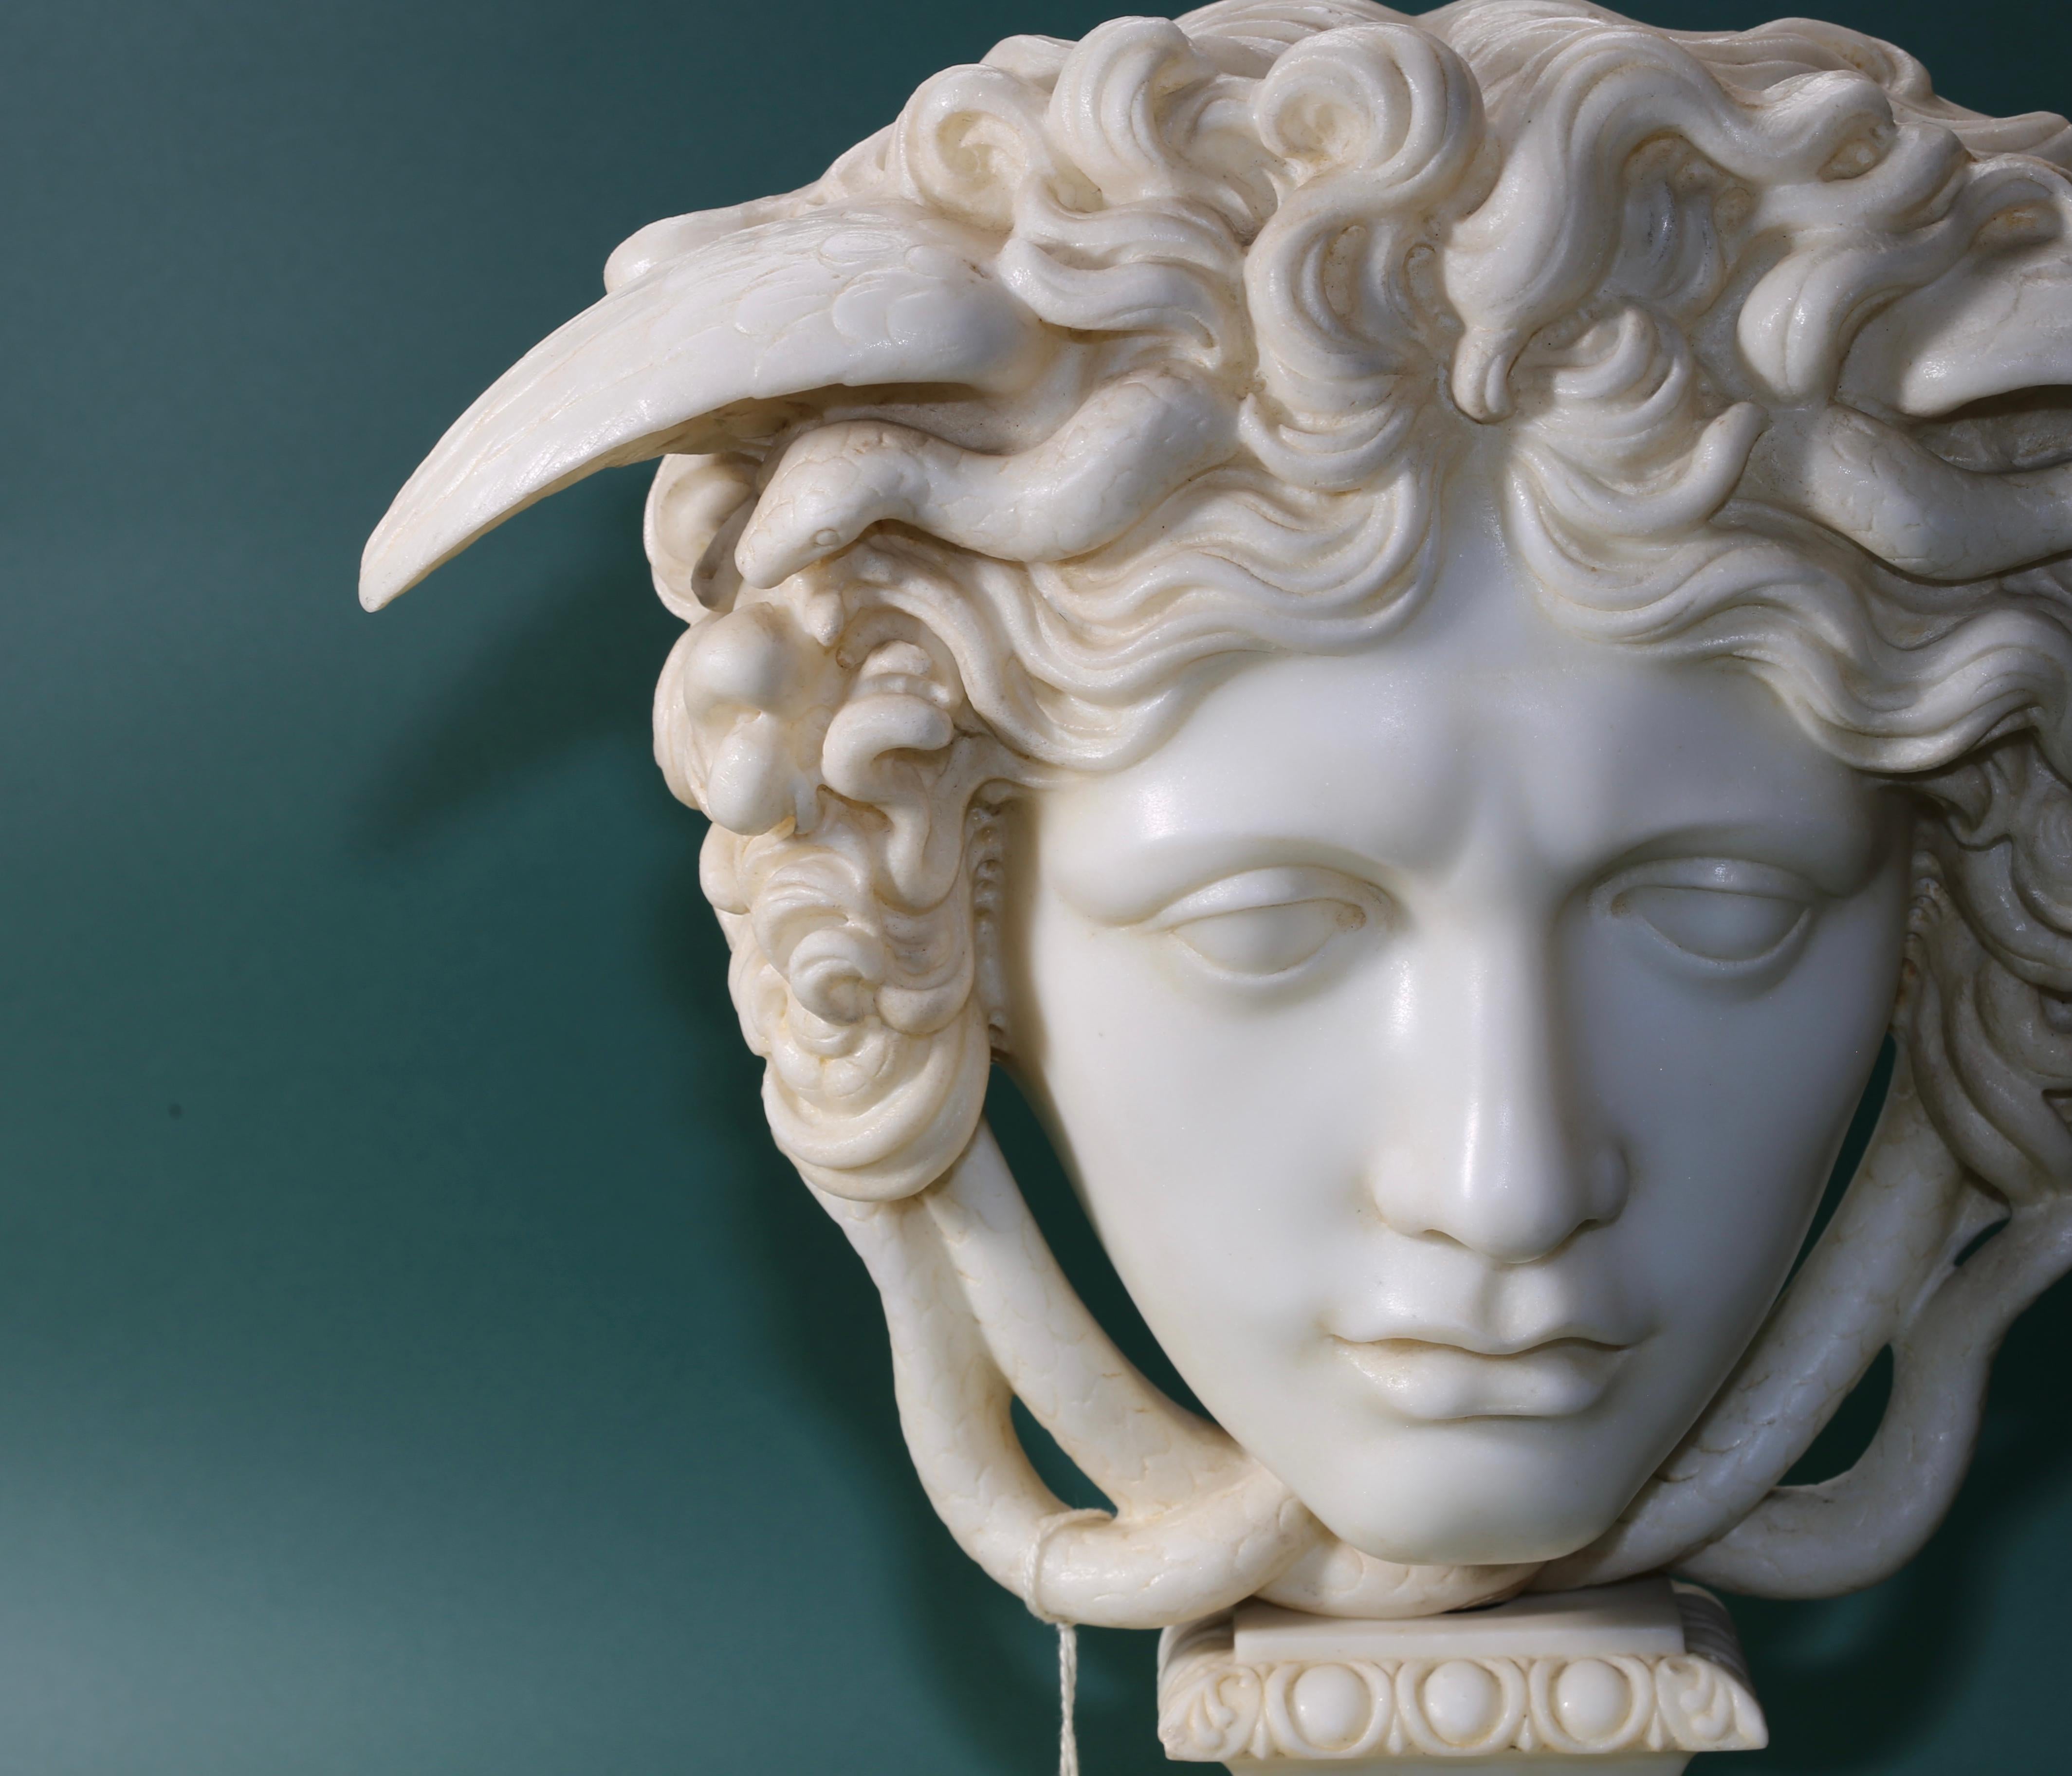 An extremely rare, beautiful and important early 19th century relief of Medusa Rondanini, made in Italy with Carrara Marble. Previously owned by a noble family in Germany. Item in very good condition.

This is the most beautiful relief of Medusa